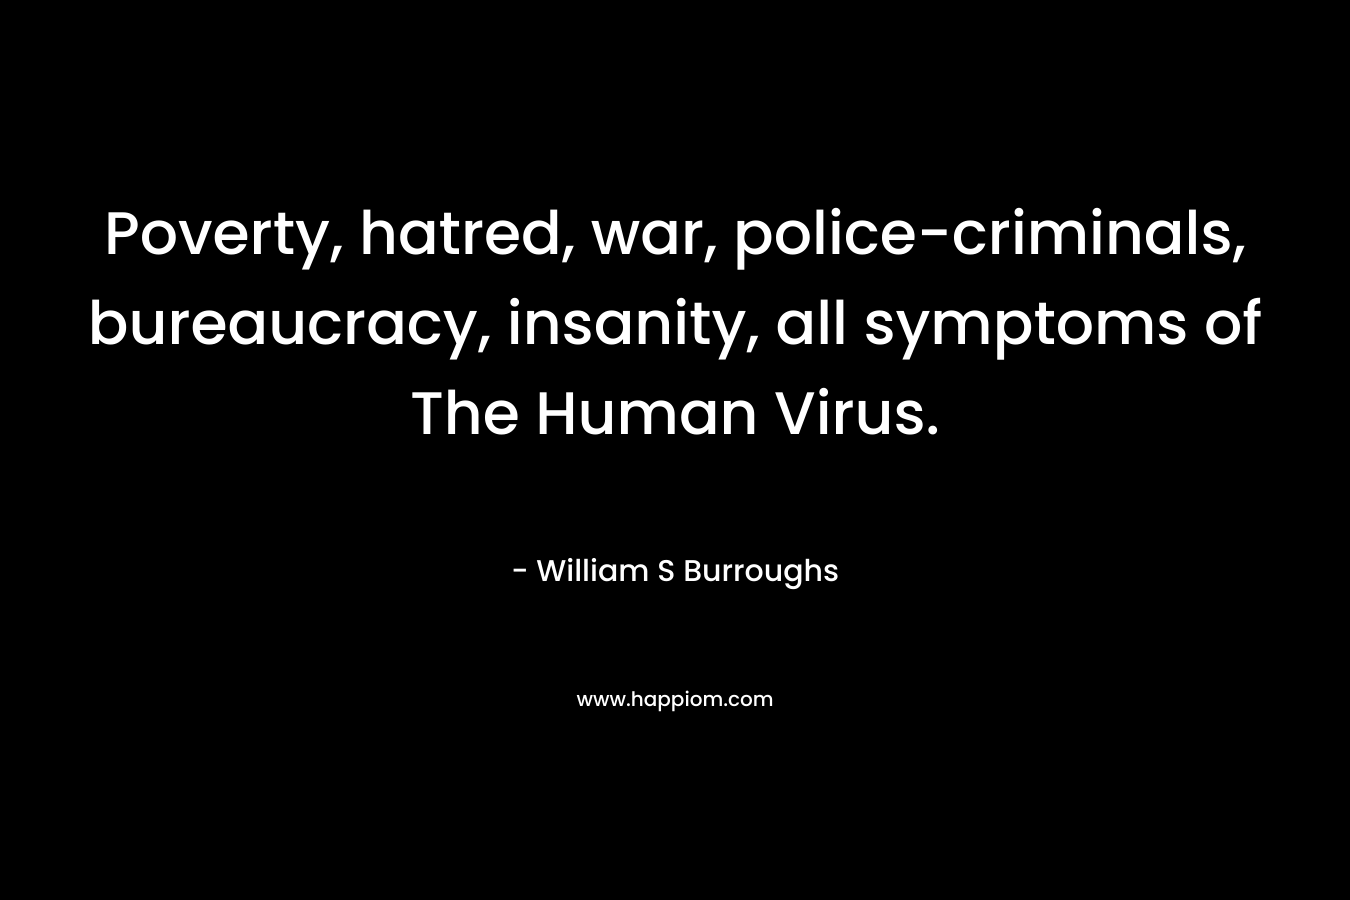 Poverty, hatred, war, police-criminals, bureaucracy, insanity, all symptoms of The Human Virus. – William S Burroughs